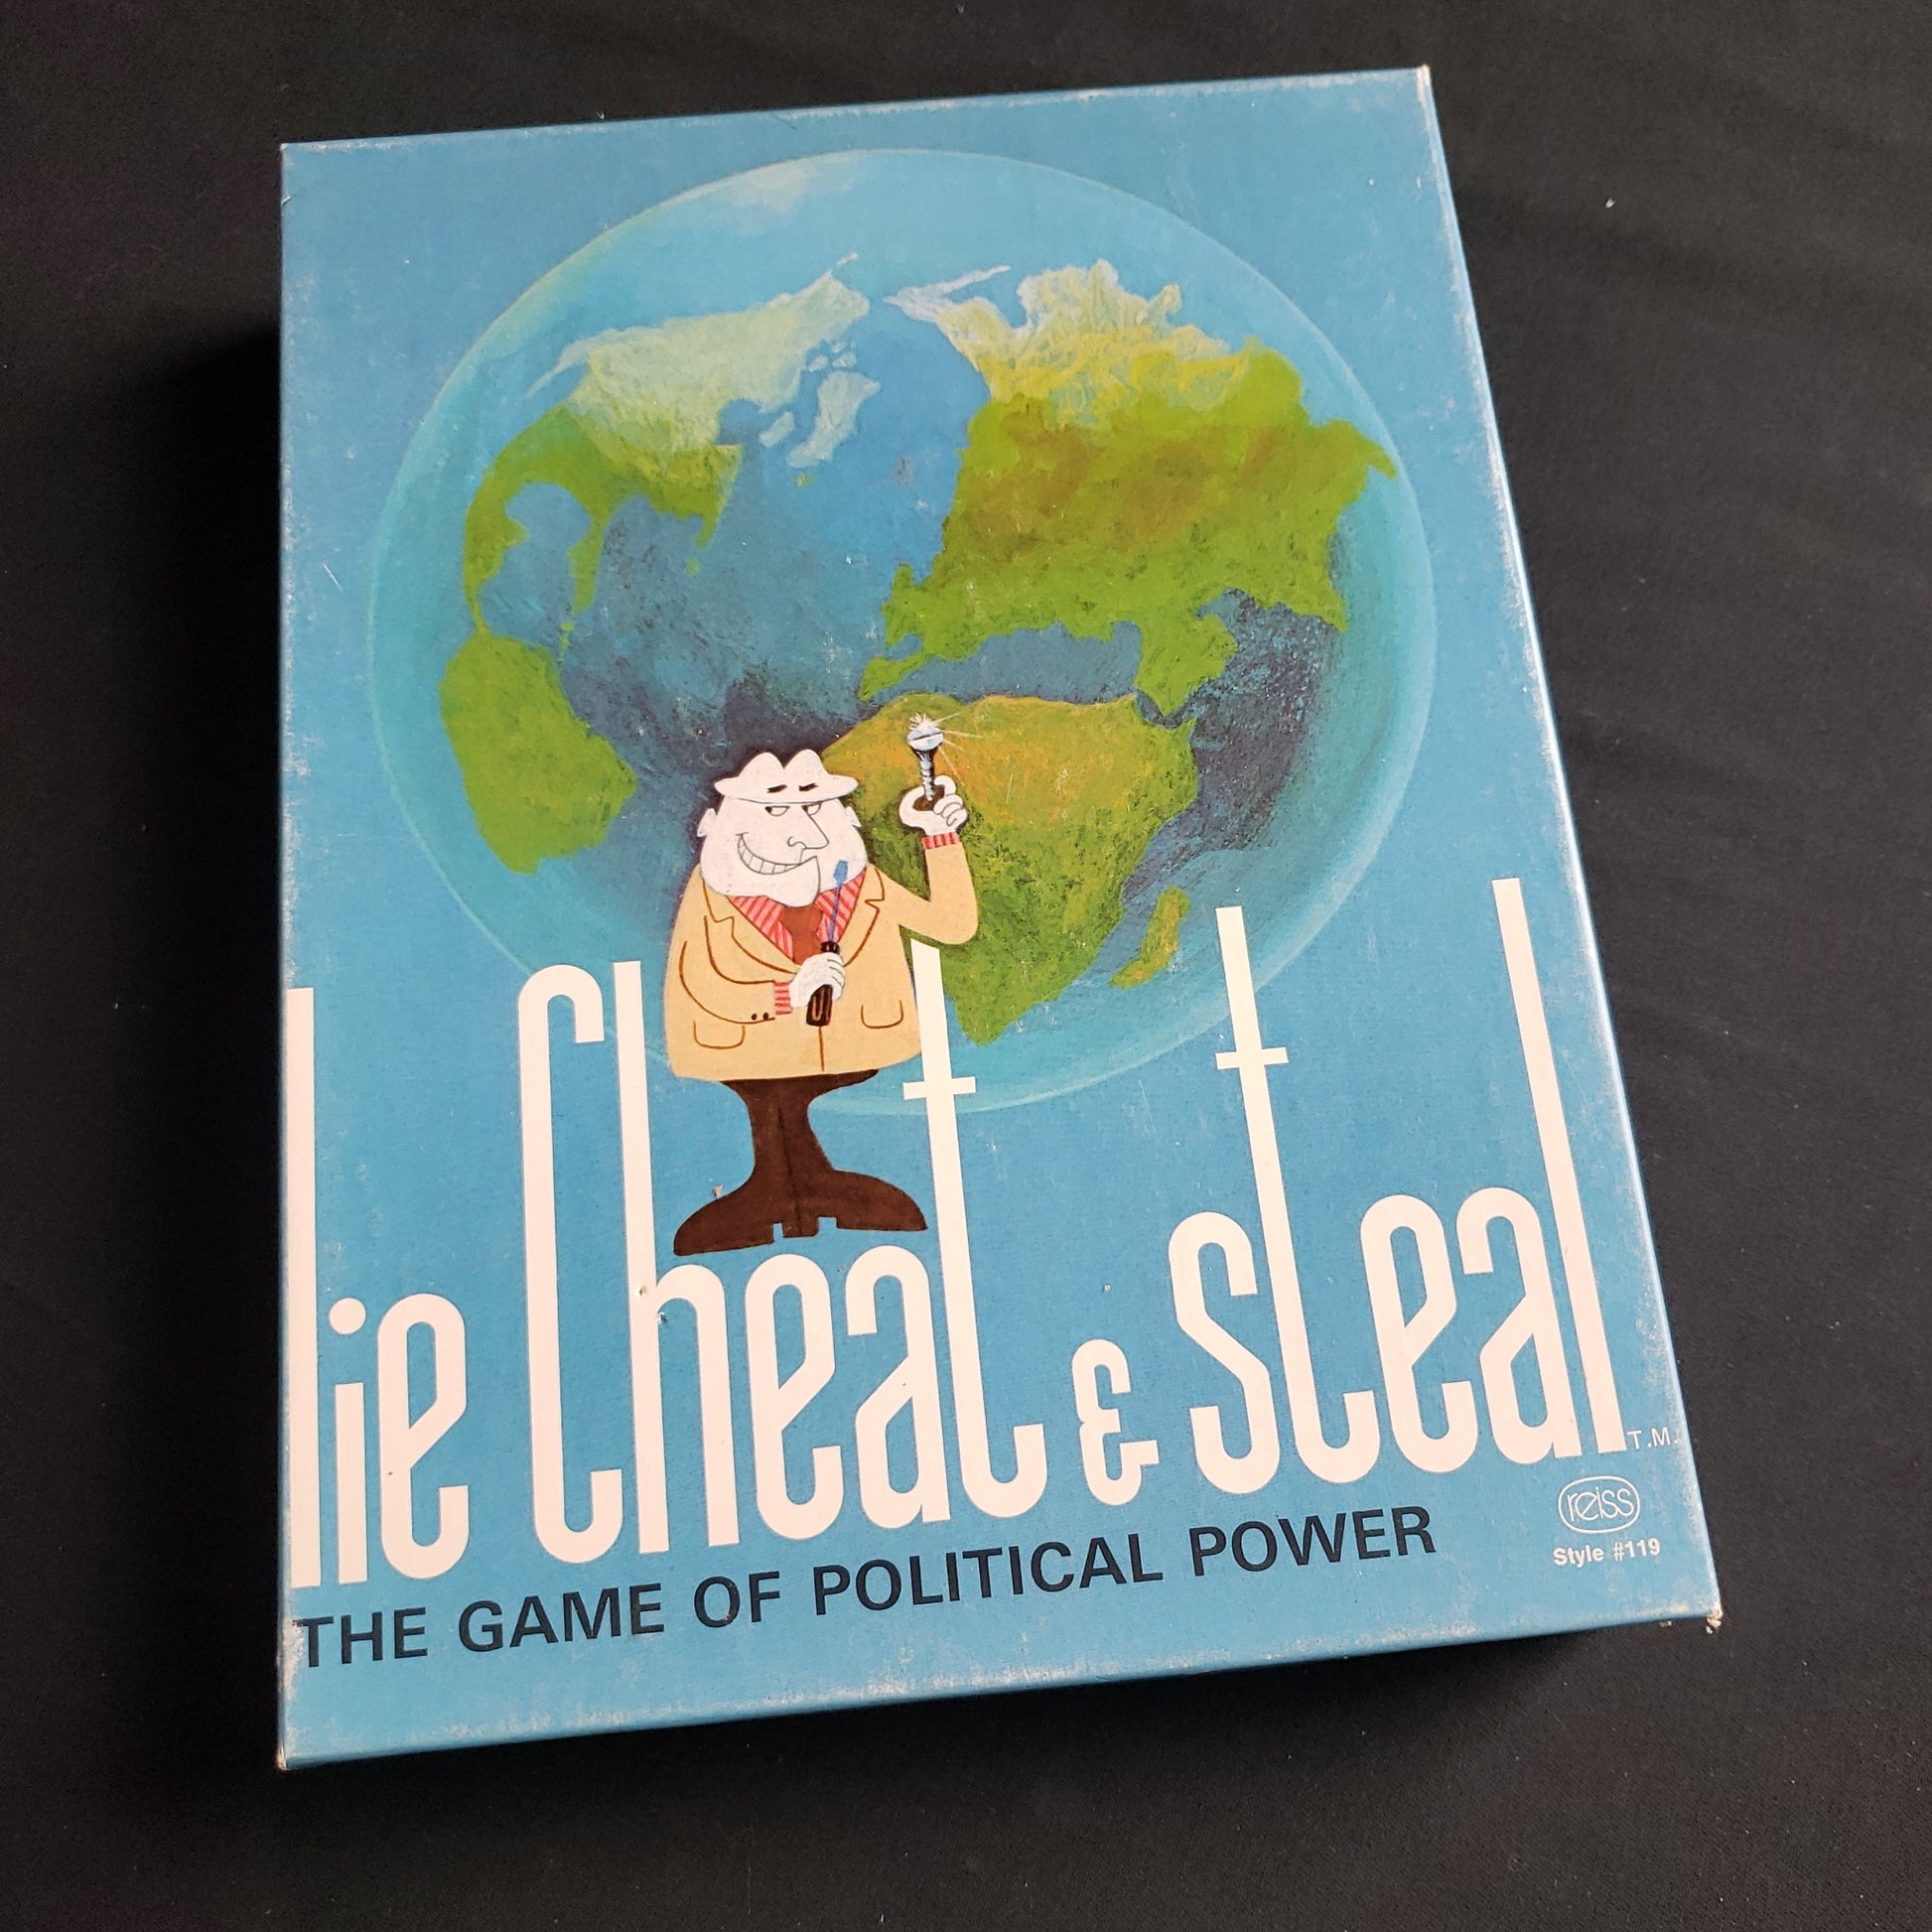 Image shows the front cover of the box of the Lie, Cheat and Steal board game